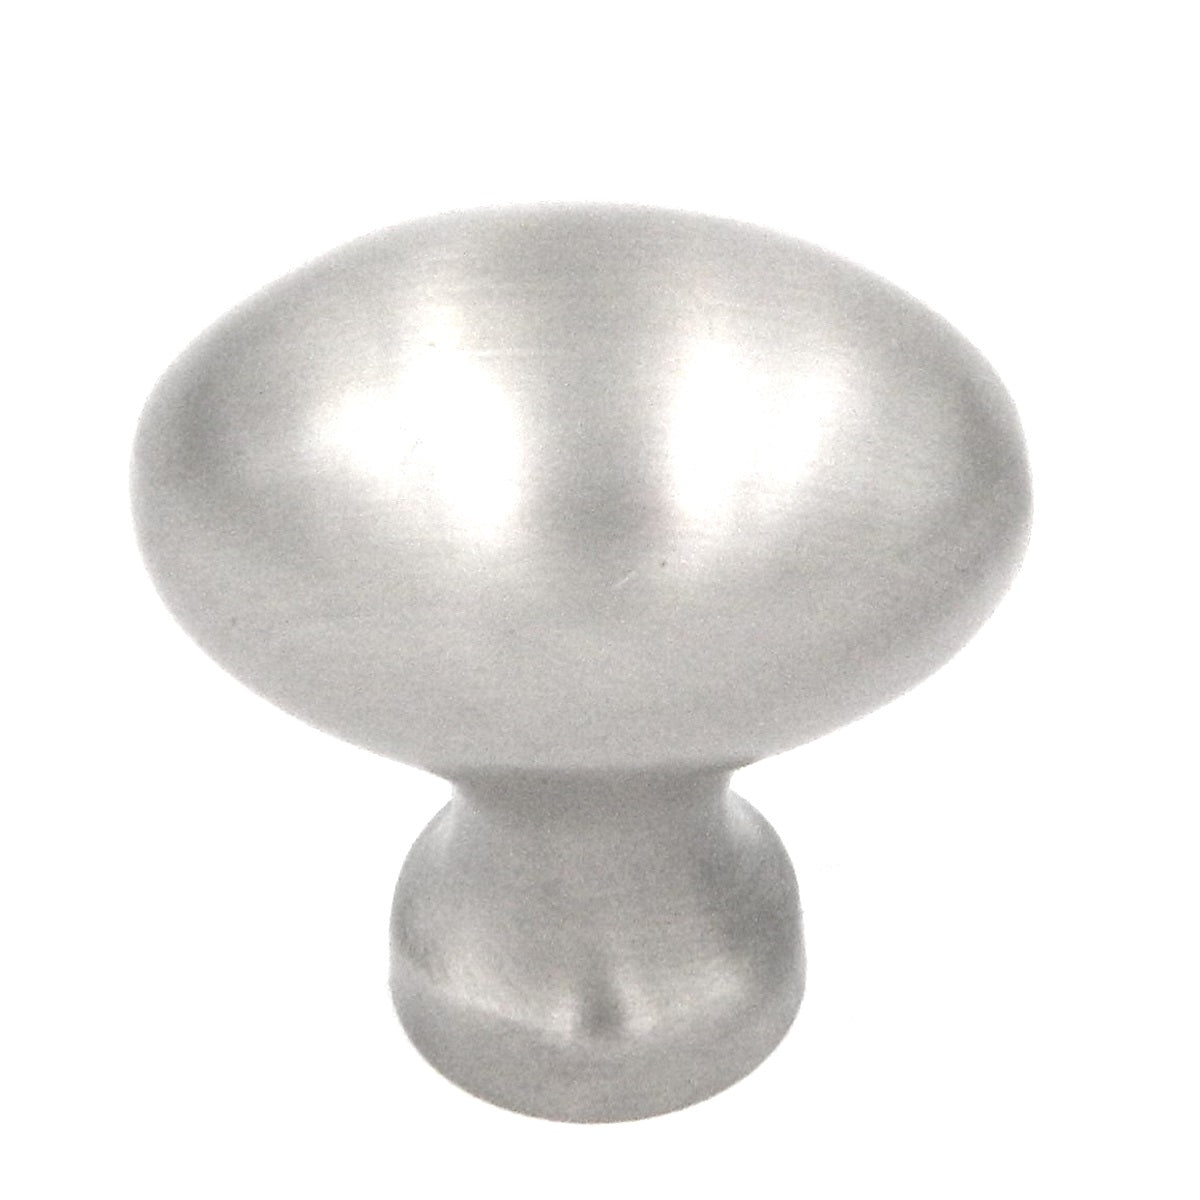 Keeler Power & Beauty Satin Nickel Oval Smooth 1 1/4" Solid Brass Cabinet Knob P9175-15